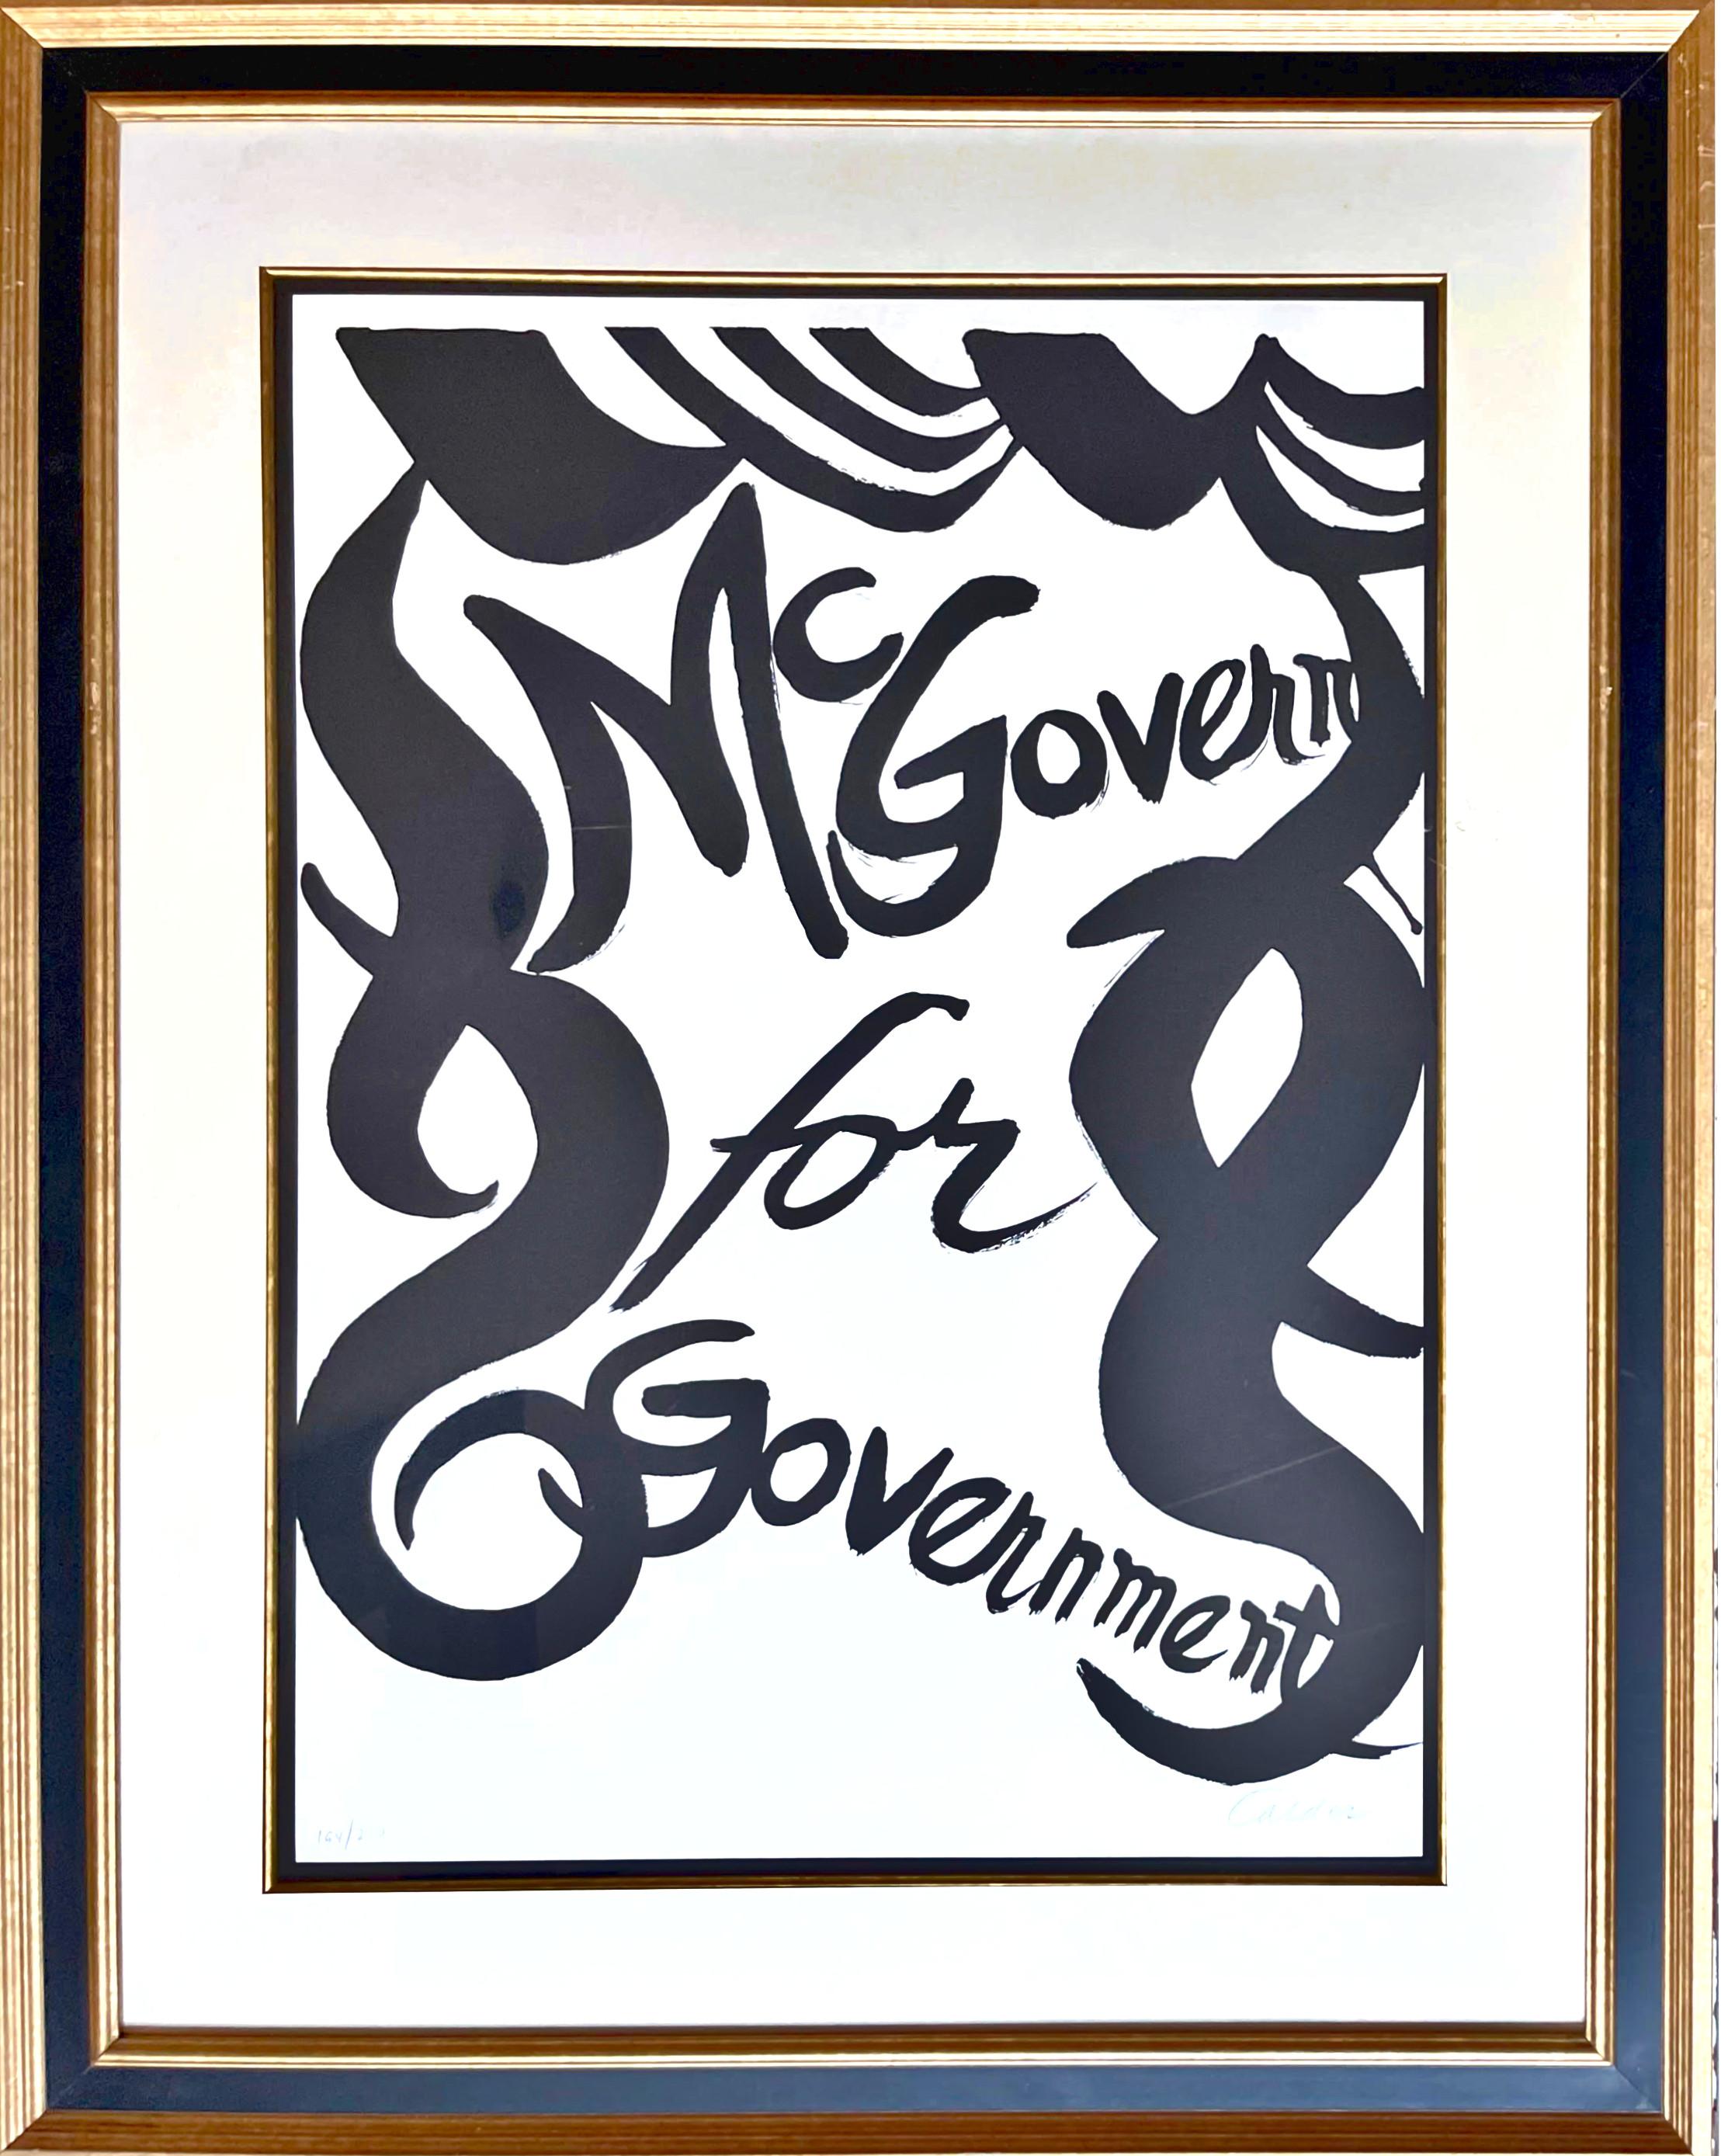 Alexander Calder Figurative Print - McGovern for McGovernment pencil signed & numbered 194/200 political lithograph